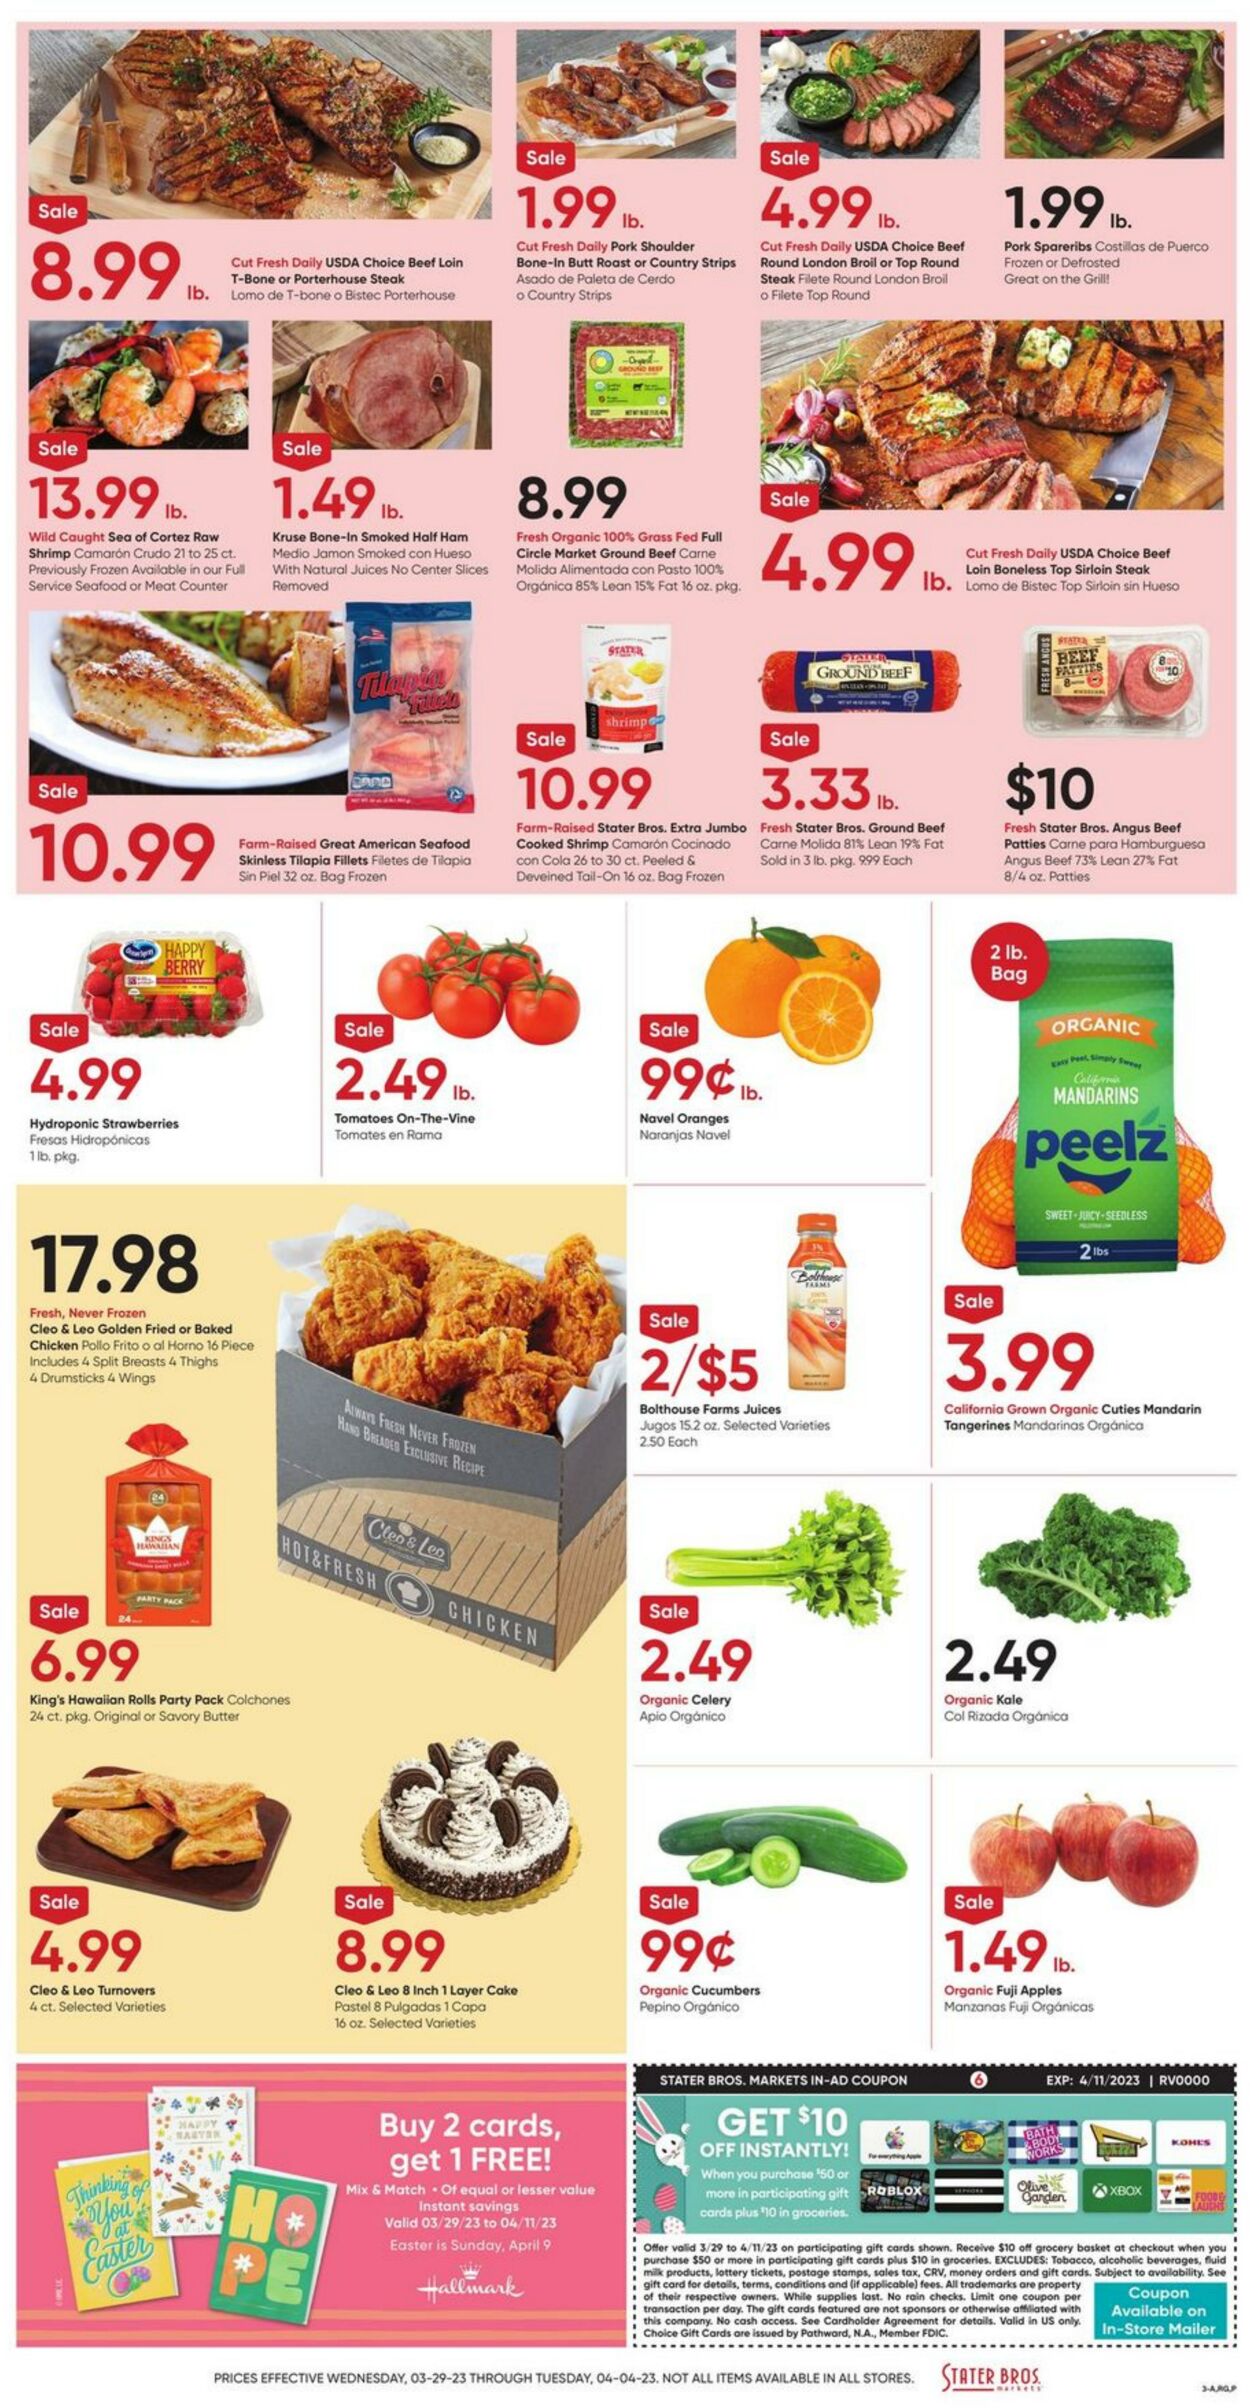 Weekly ad Stater Bros 03/29/2023 - 04/04/2023